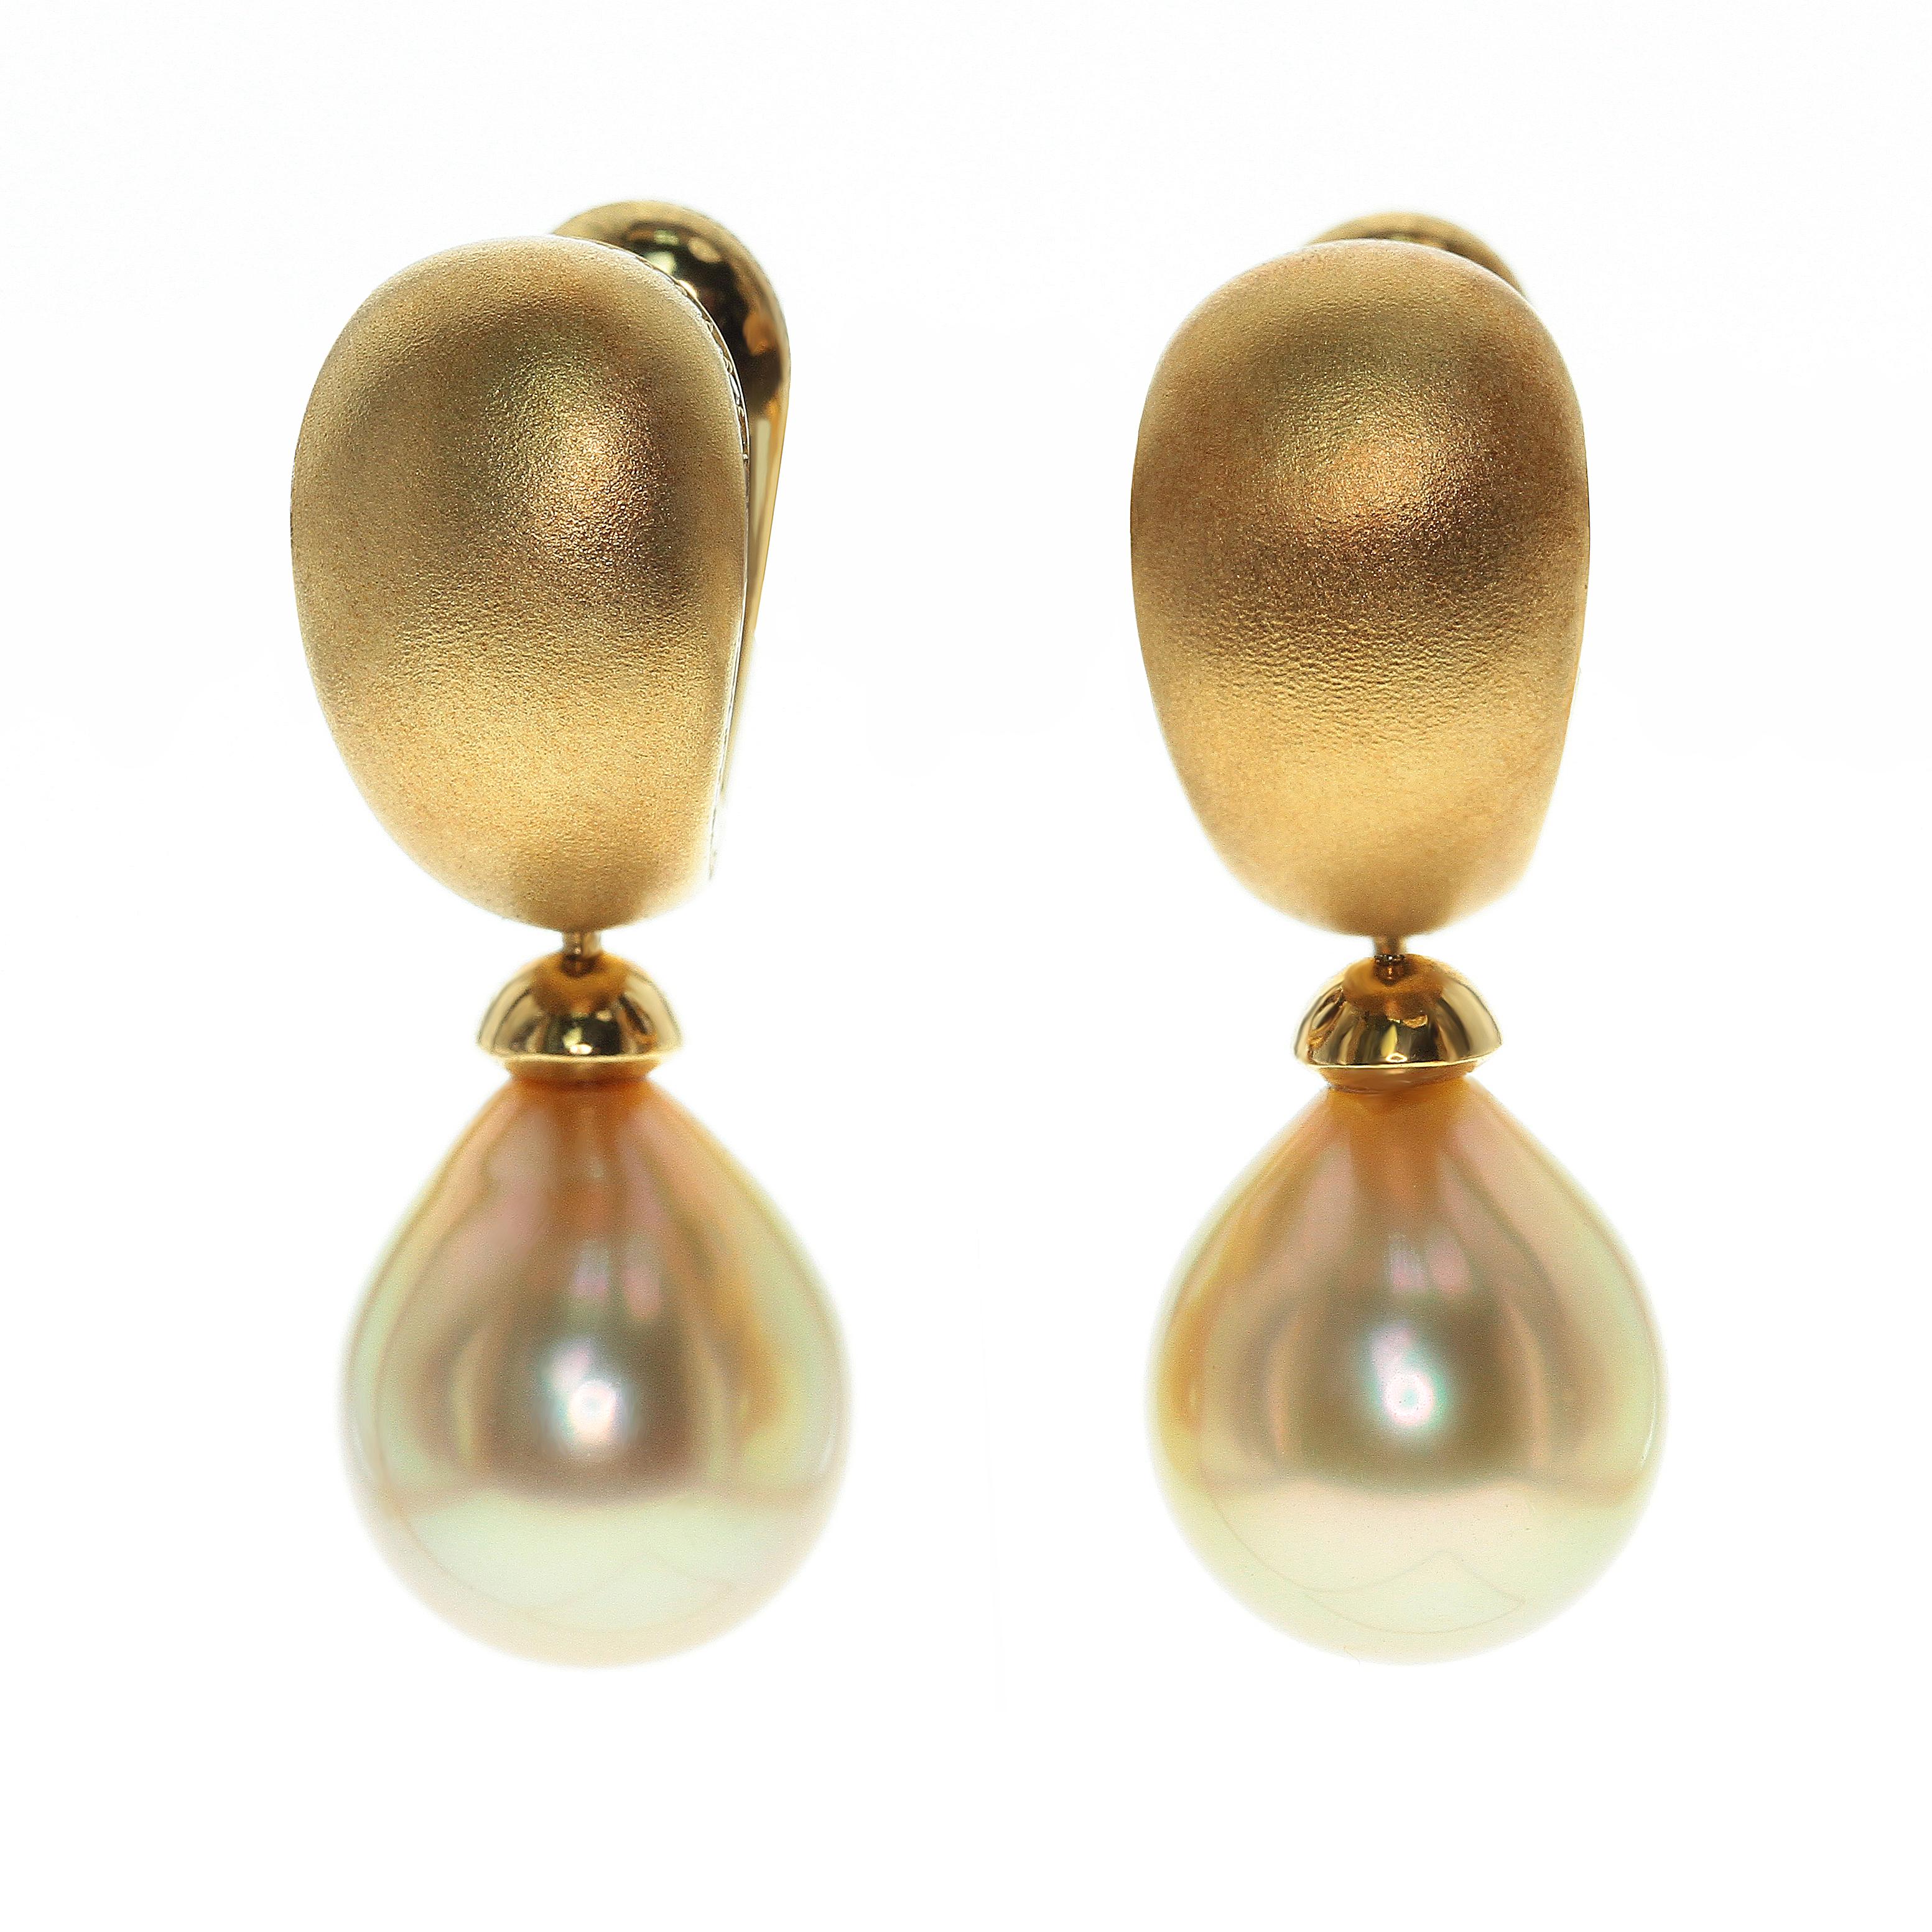 Golden South Sea Pearl Diamonds Drop Earrings

Very comfortable earrings. Smooth design in combine with a smooth surface of a pearl gives perfect result. Brown diamonds carefully selected to support the pearl color. Pure triumph of Golden!!!
Please